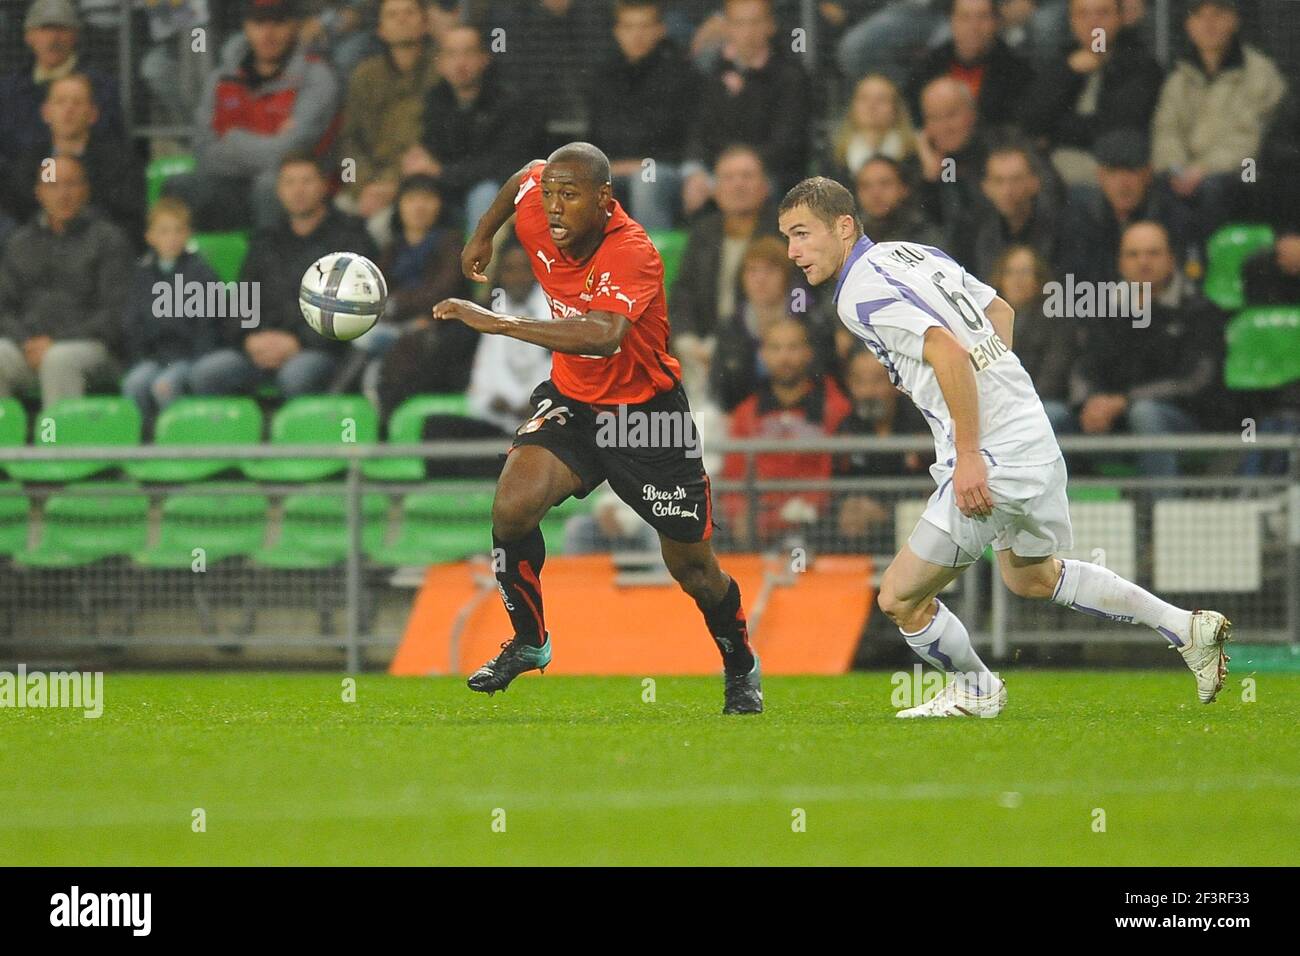 FOOTBALL - FRENCH CHAMPIONSHIP 2010/2011 - L1 - STADE RENNAIS v TOULOUSE FC - 3/10/2010 - PHOTO PASCAL ALLEE / DPPI - KEVIN THEOPHILE CATHERINE (RENNES) / ANTOINE DEVAUX (TFC) Stock Photo